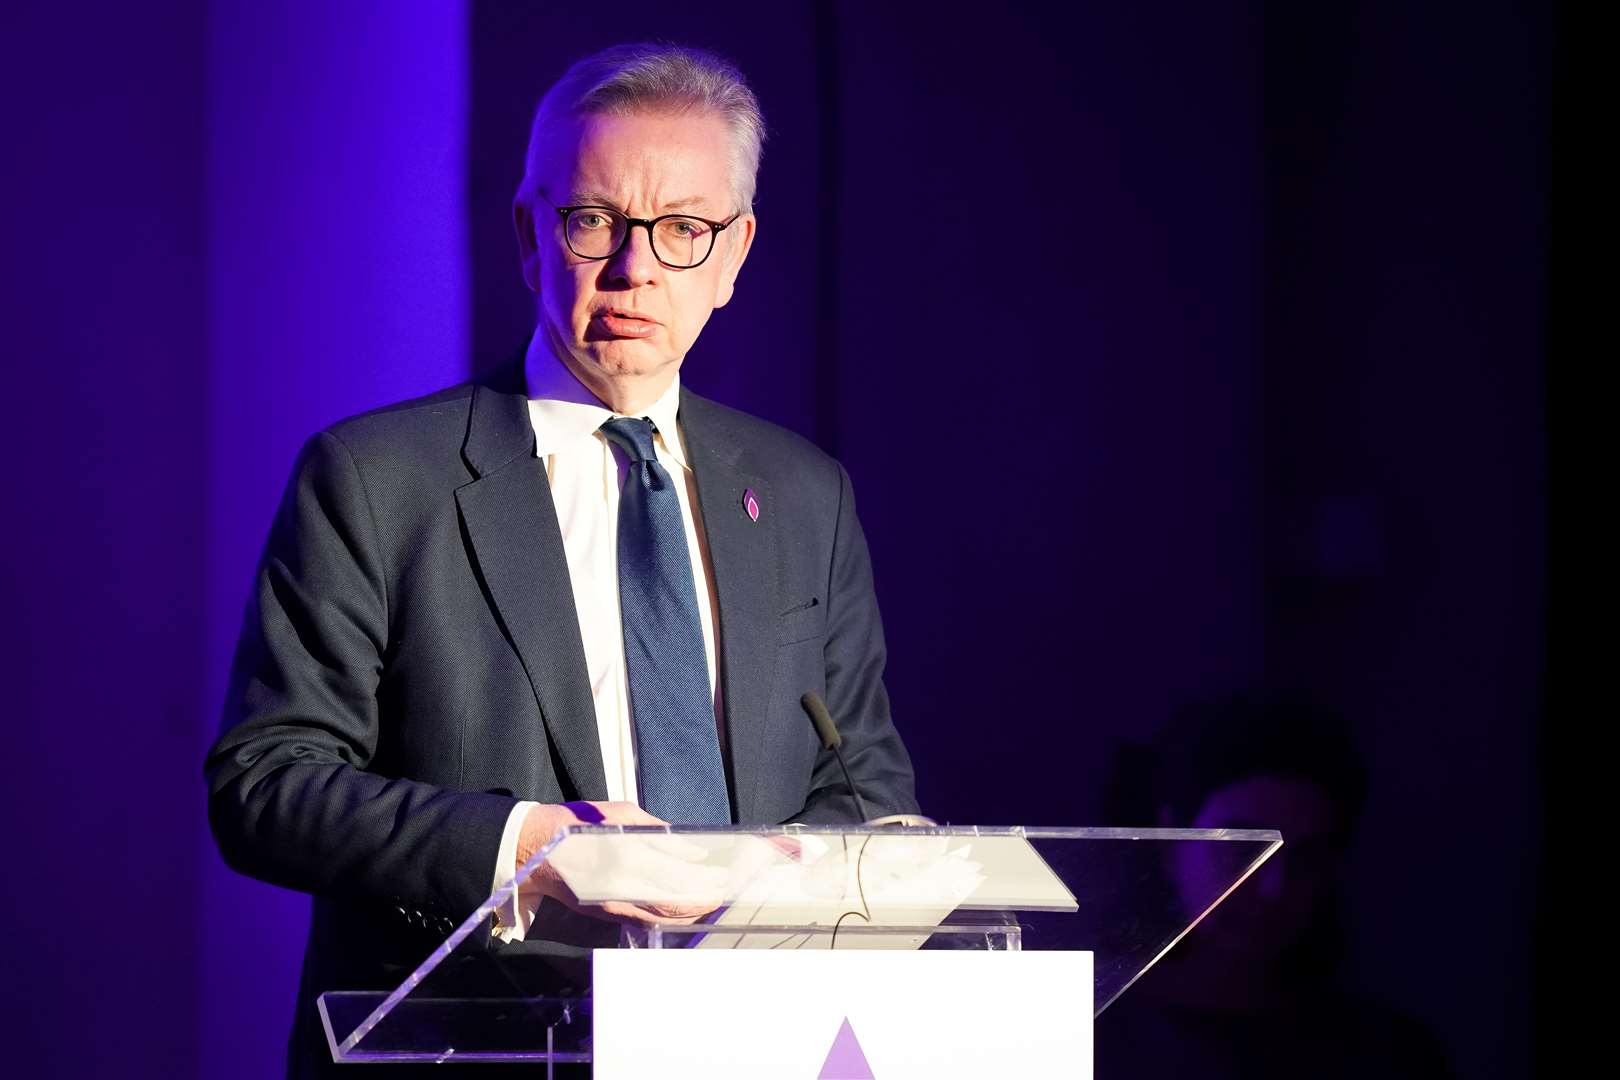 Secretary of State for Levelling Up, Housing and Communities Michael Gove, speaking at the commemorative ceremony at St John’s Smith Square in London (James Manning/PA)